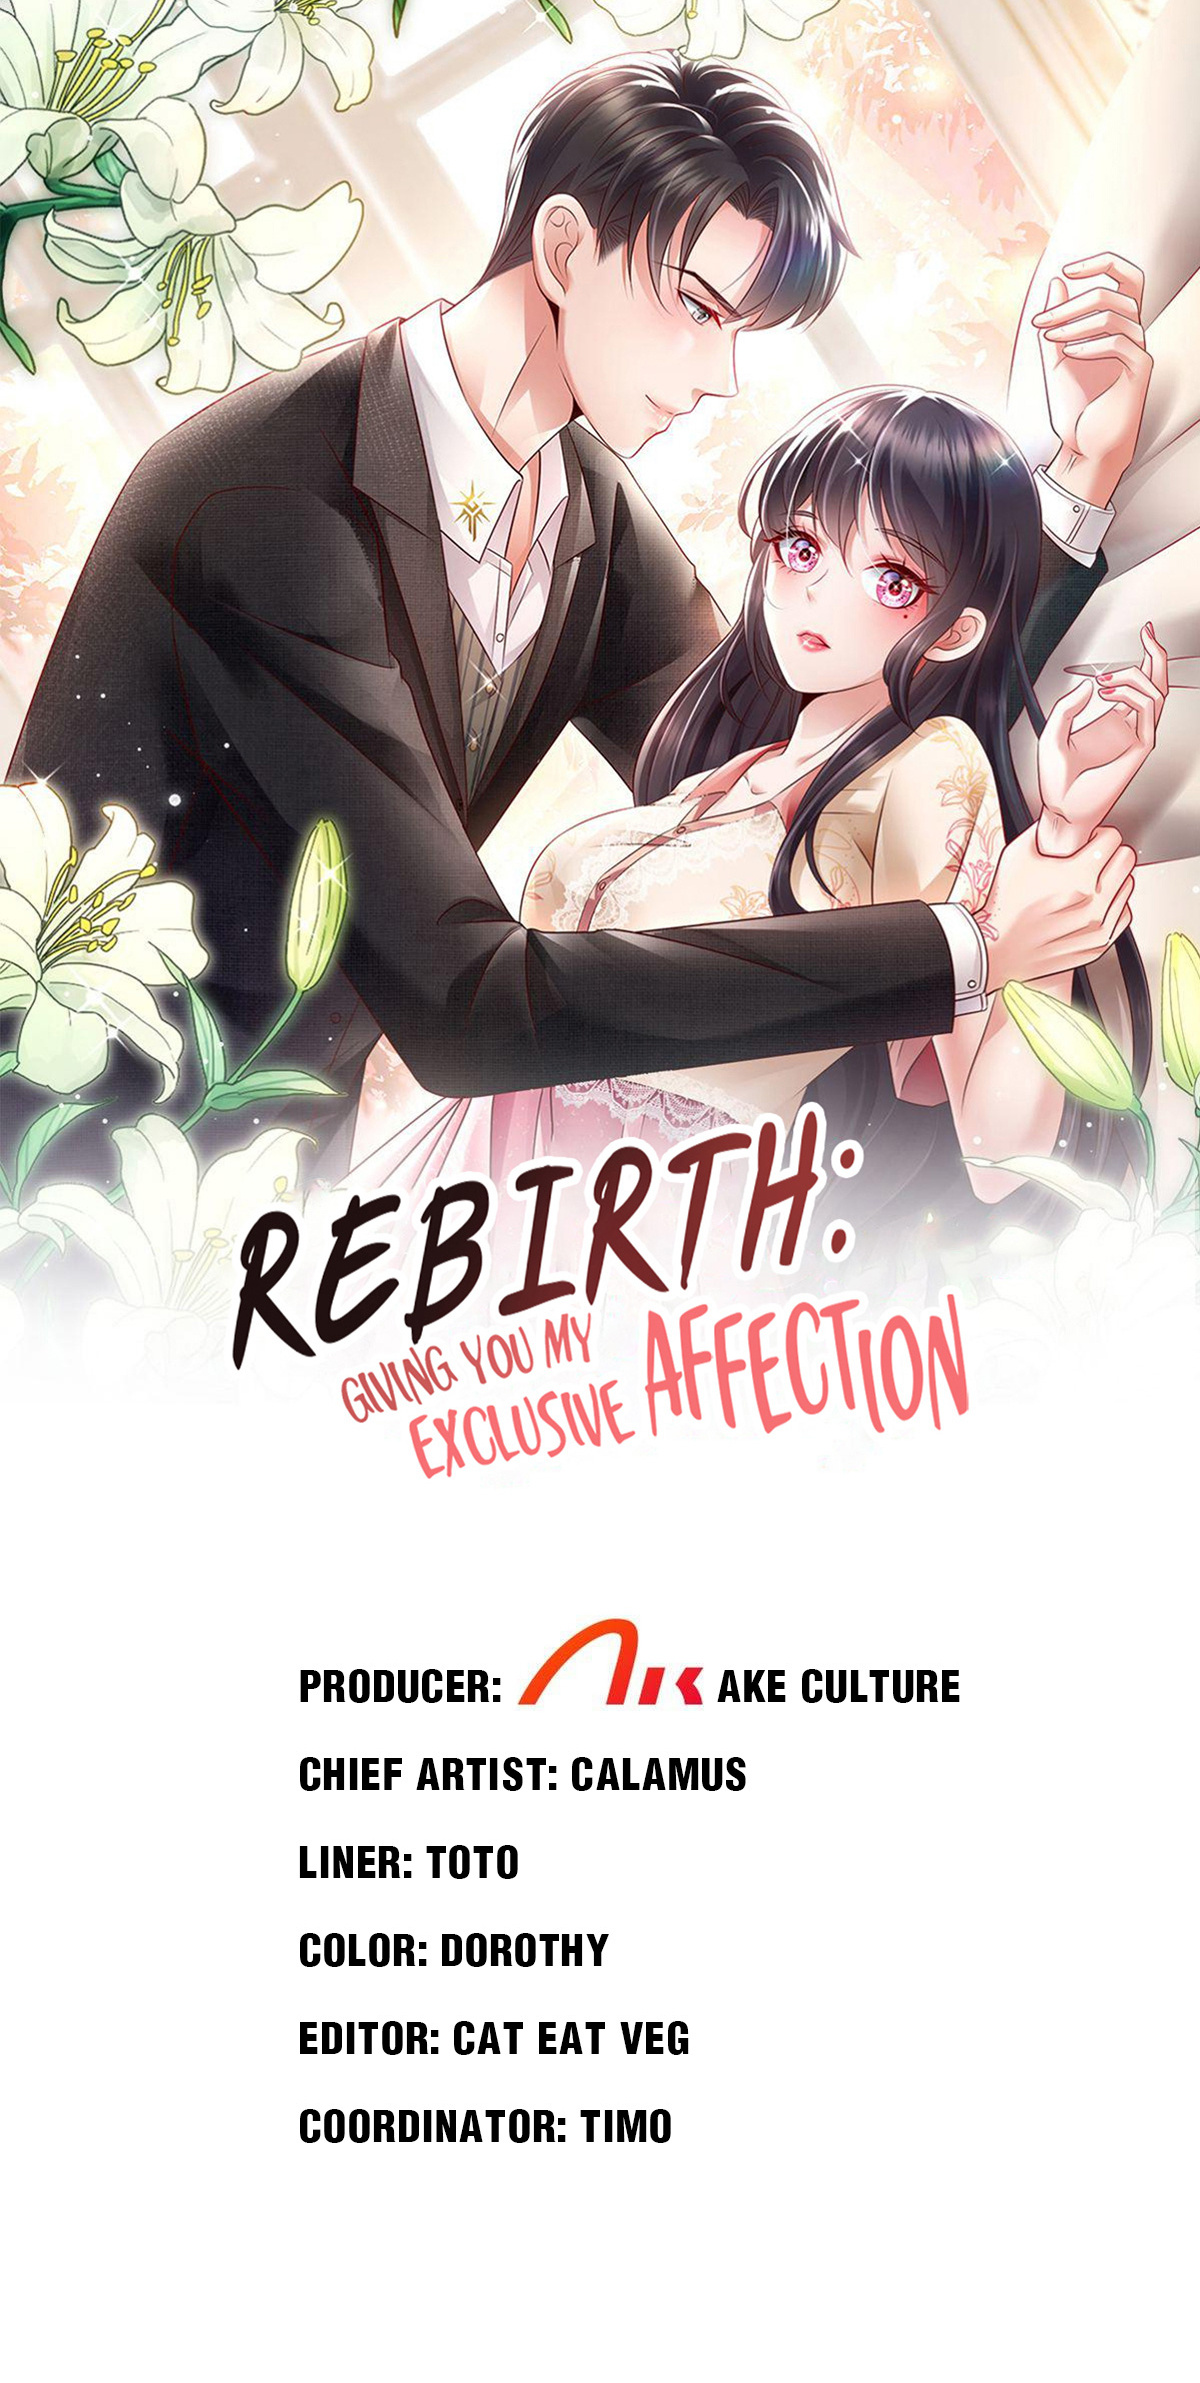 Rebirth: Giving You My Exclusive Affection 256